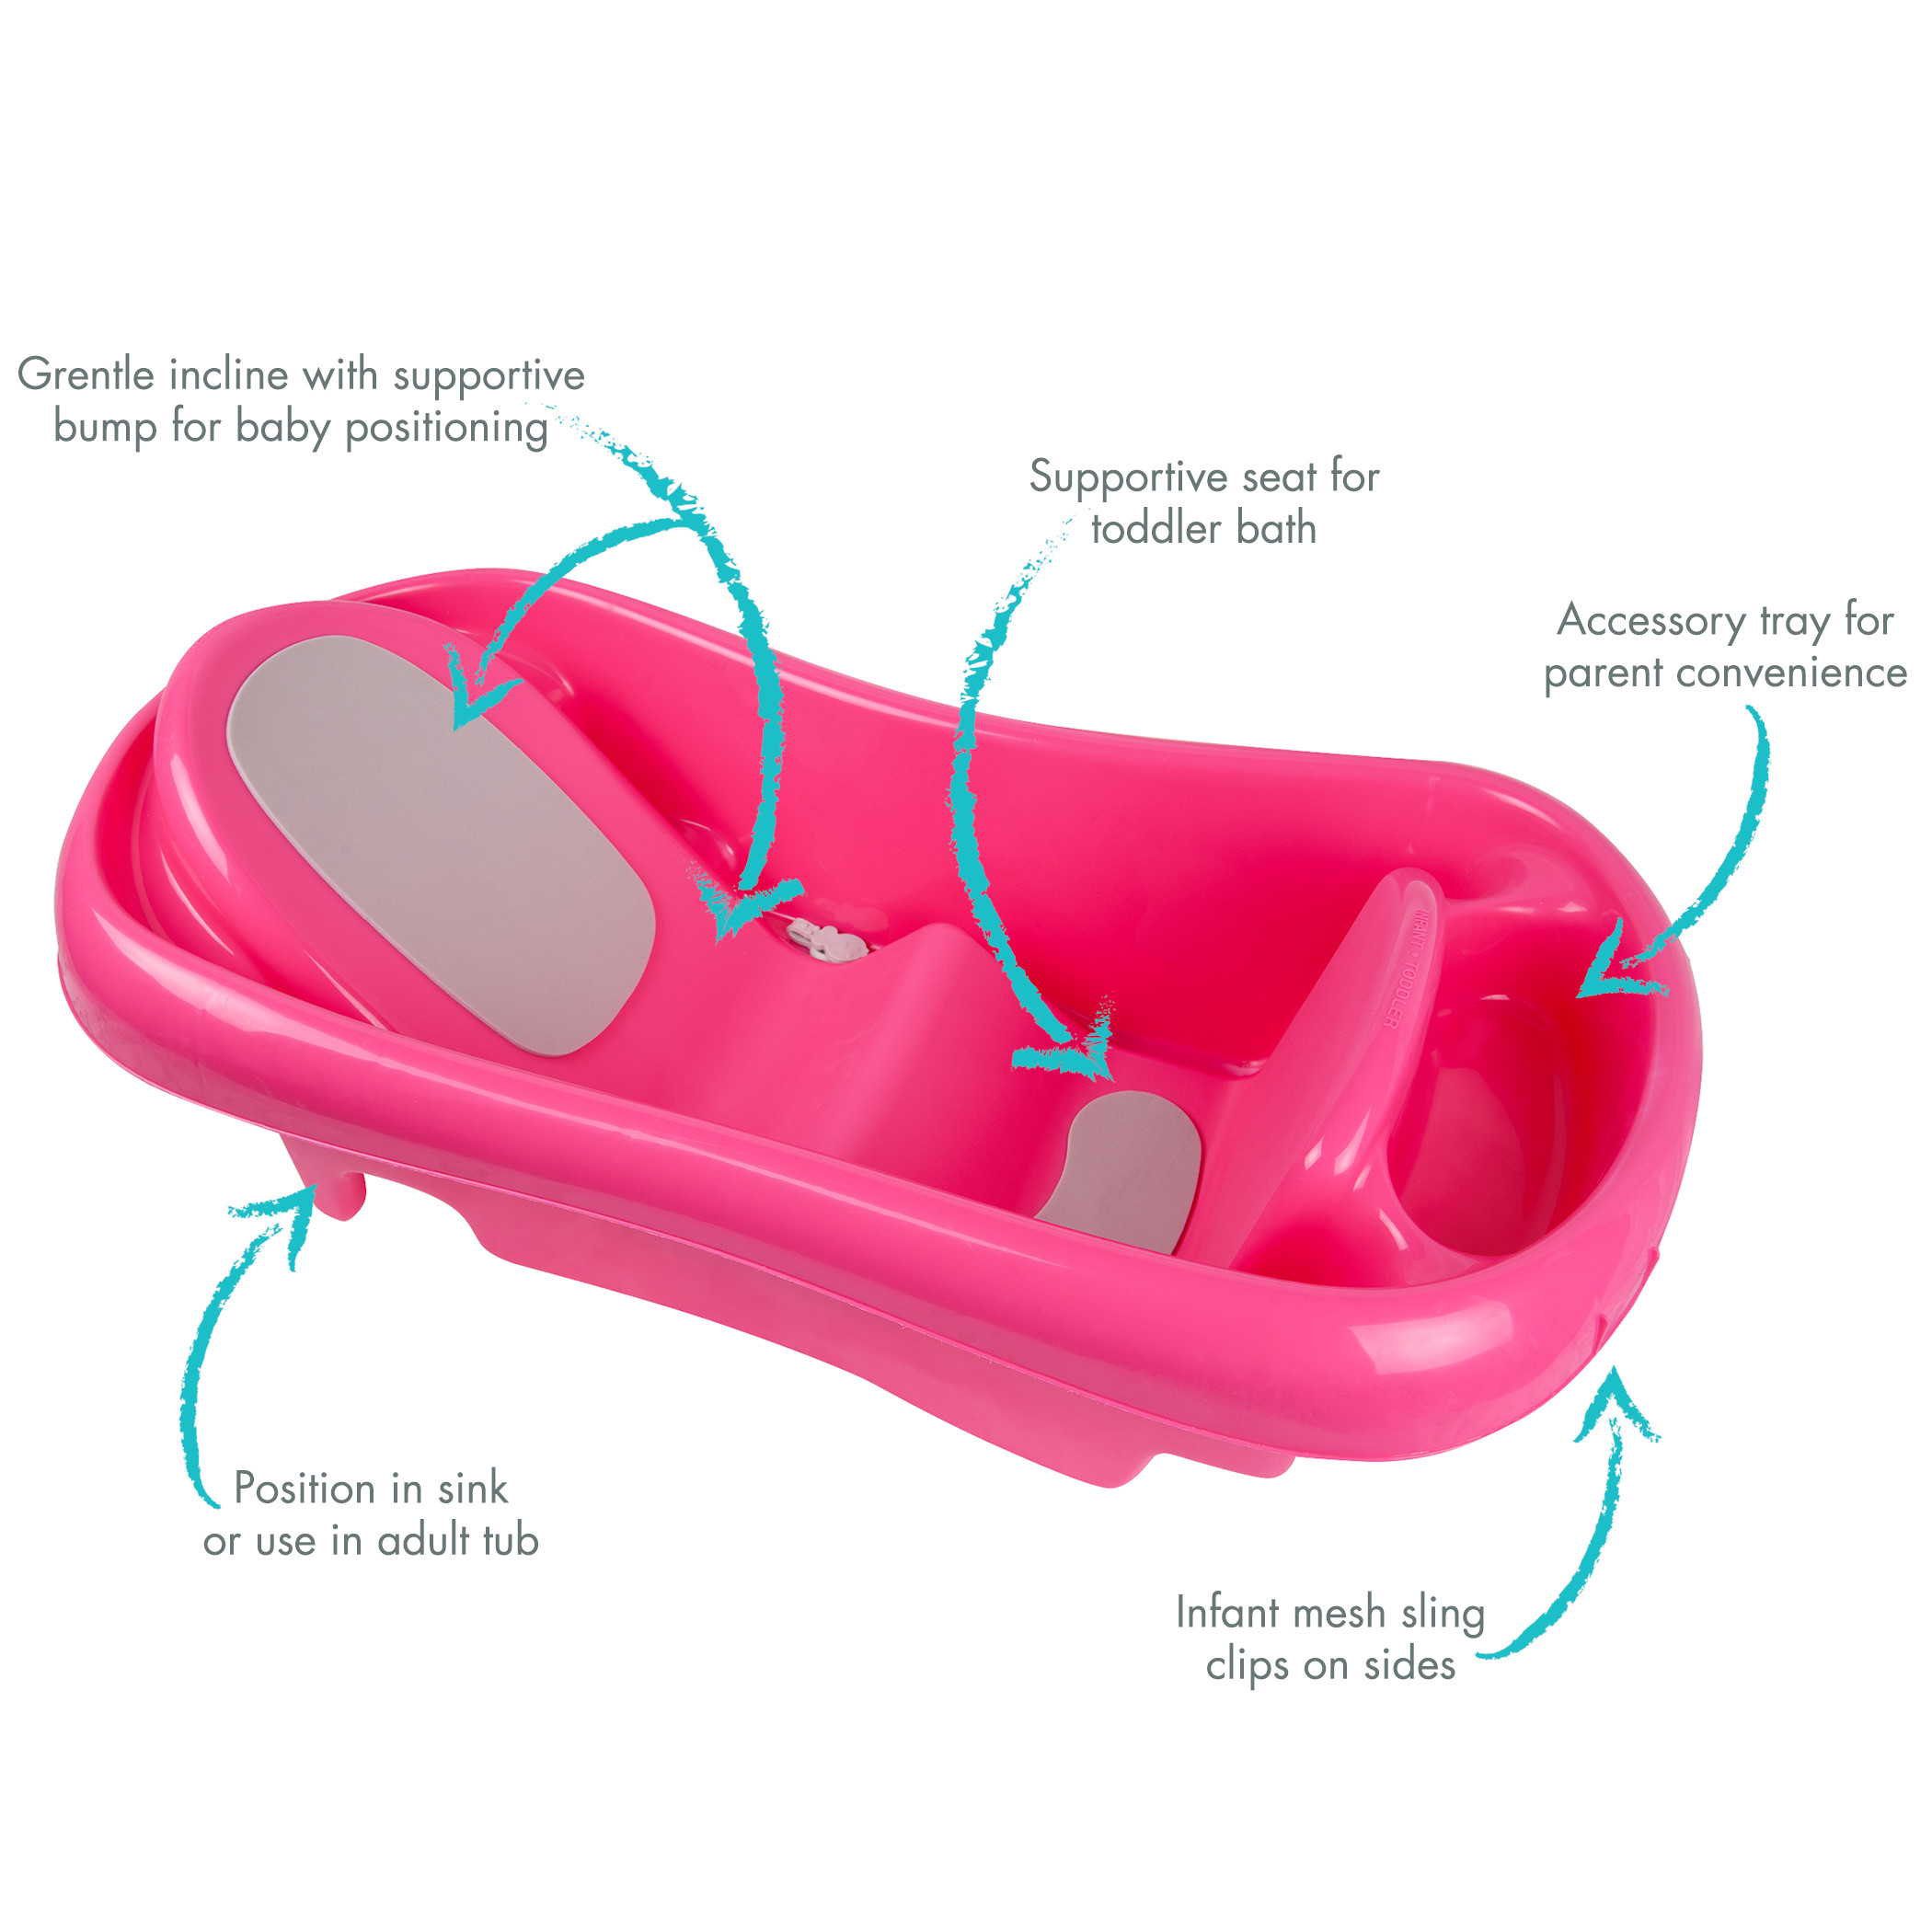 The First Years Y7135 Sure Comfort Deluxe Newborn To Toddler Tub Pink - image 3 of 7